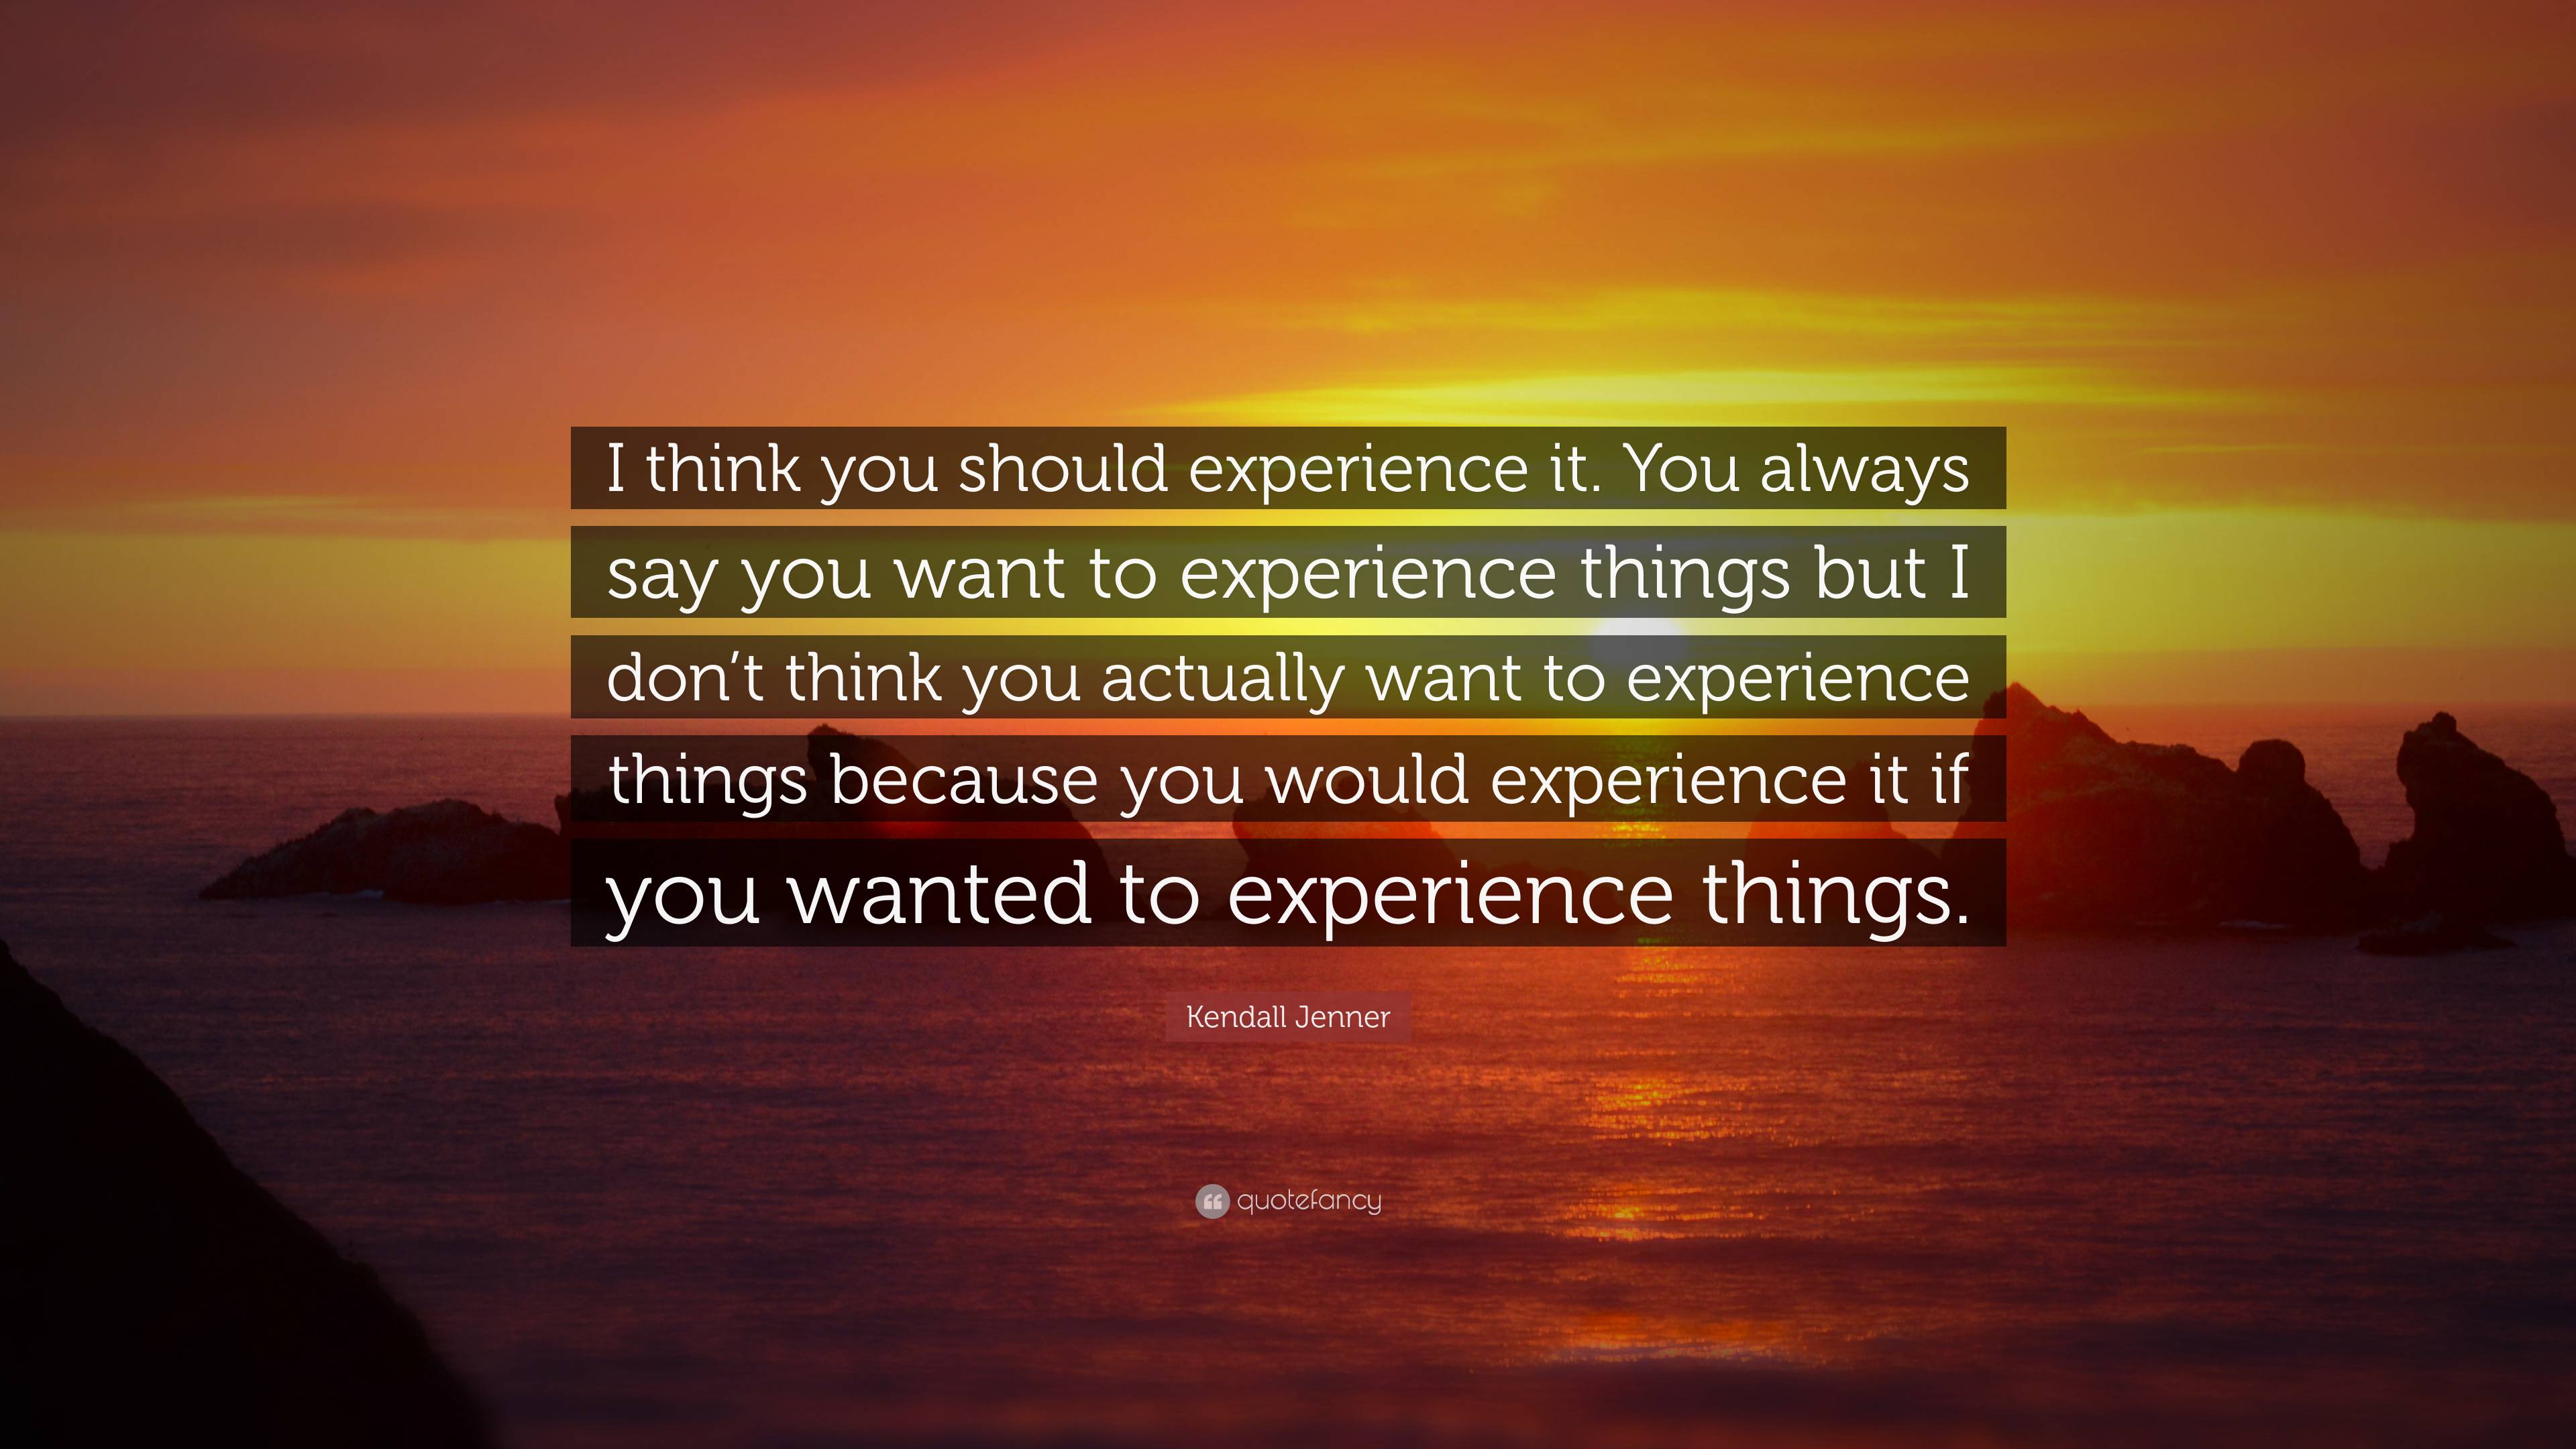 Kendall Jenner Quote: “I think you should experience it. You always say ...